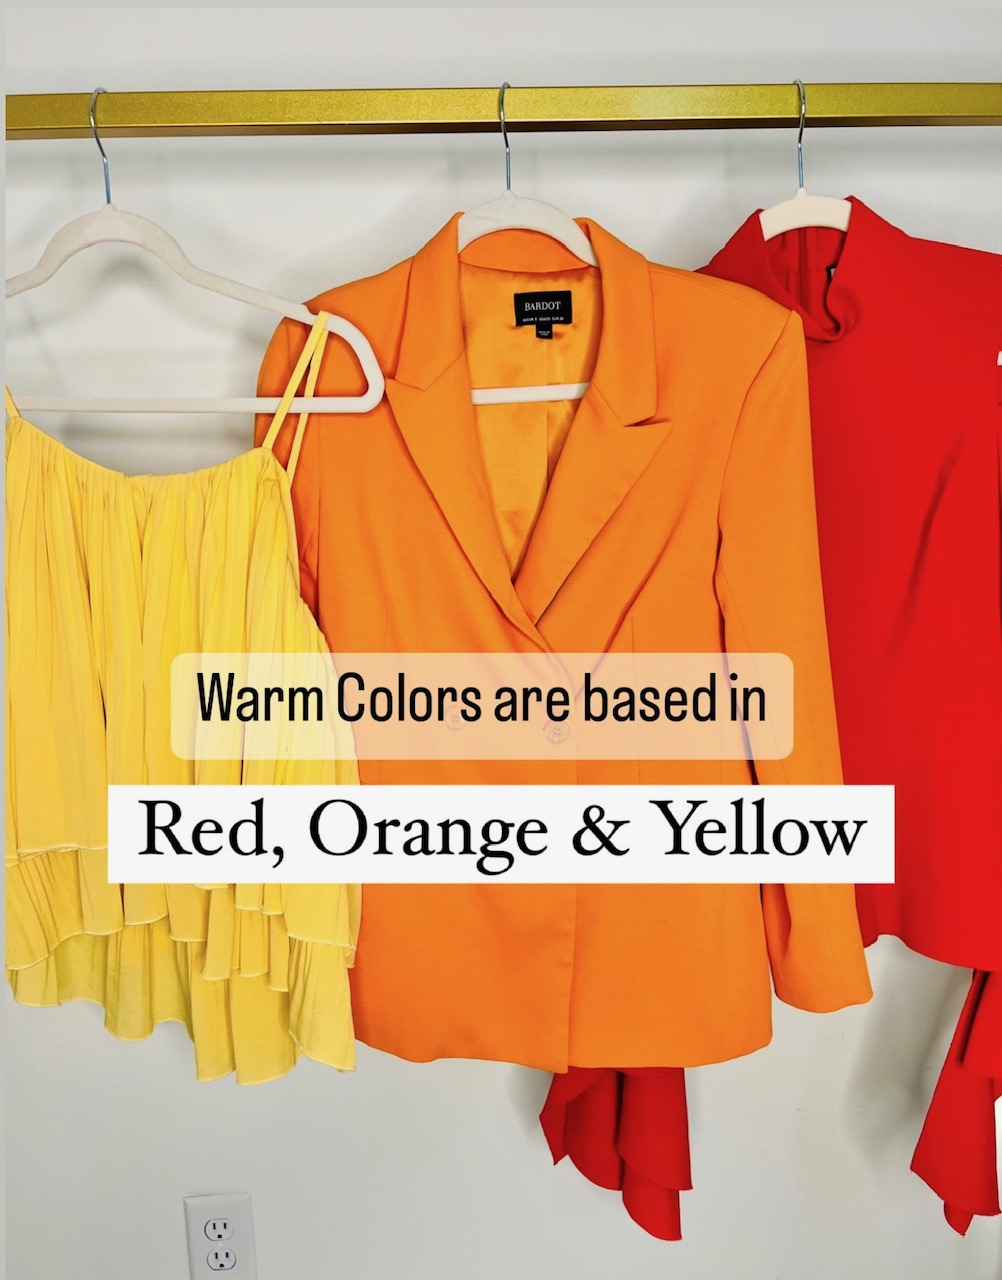 How to Wear Your Ideal Colors to Wear, warm vs. cool colors, what are warm colors